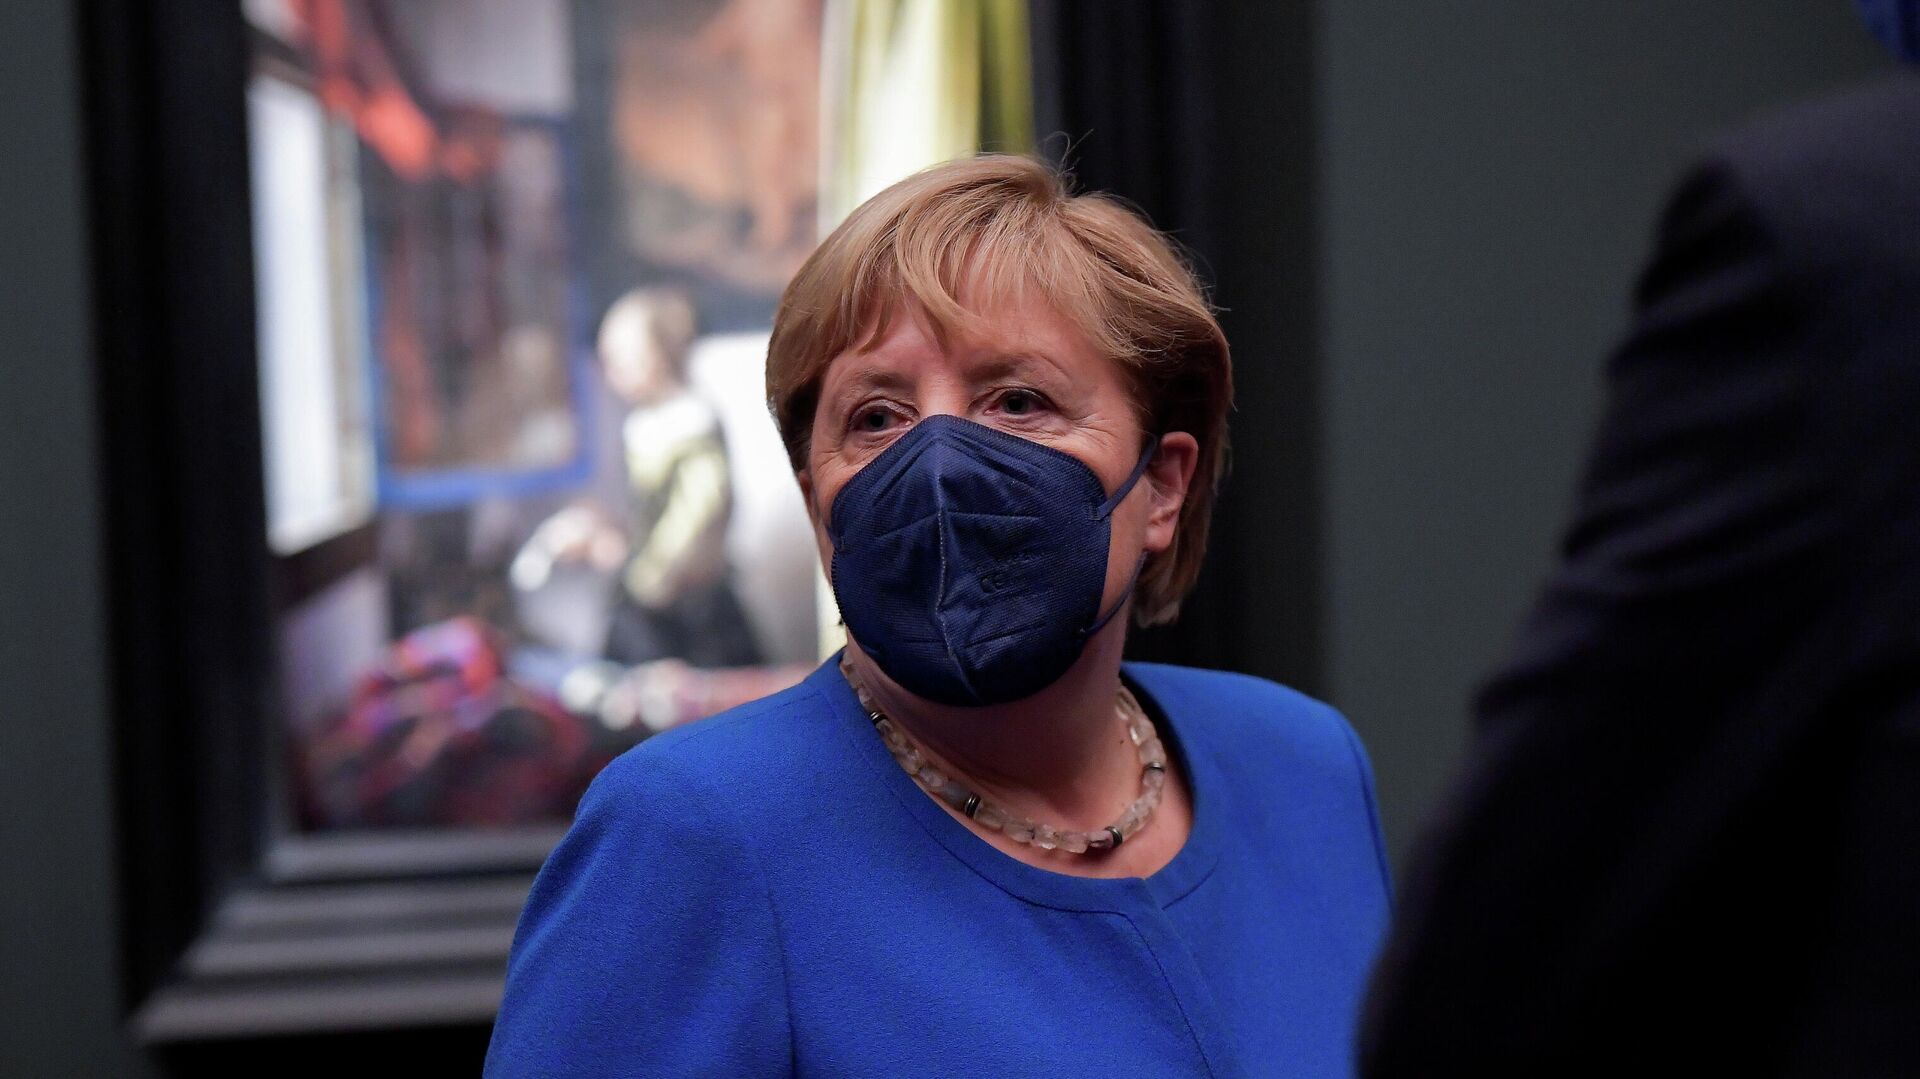 German Chancellor Angela Merkel attends the opening of the largest exhibition on the Dutch painter Johannes Vermeer in Germany, September 9, 2021 - Sputnik International, 1920, 09.09.2021